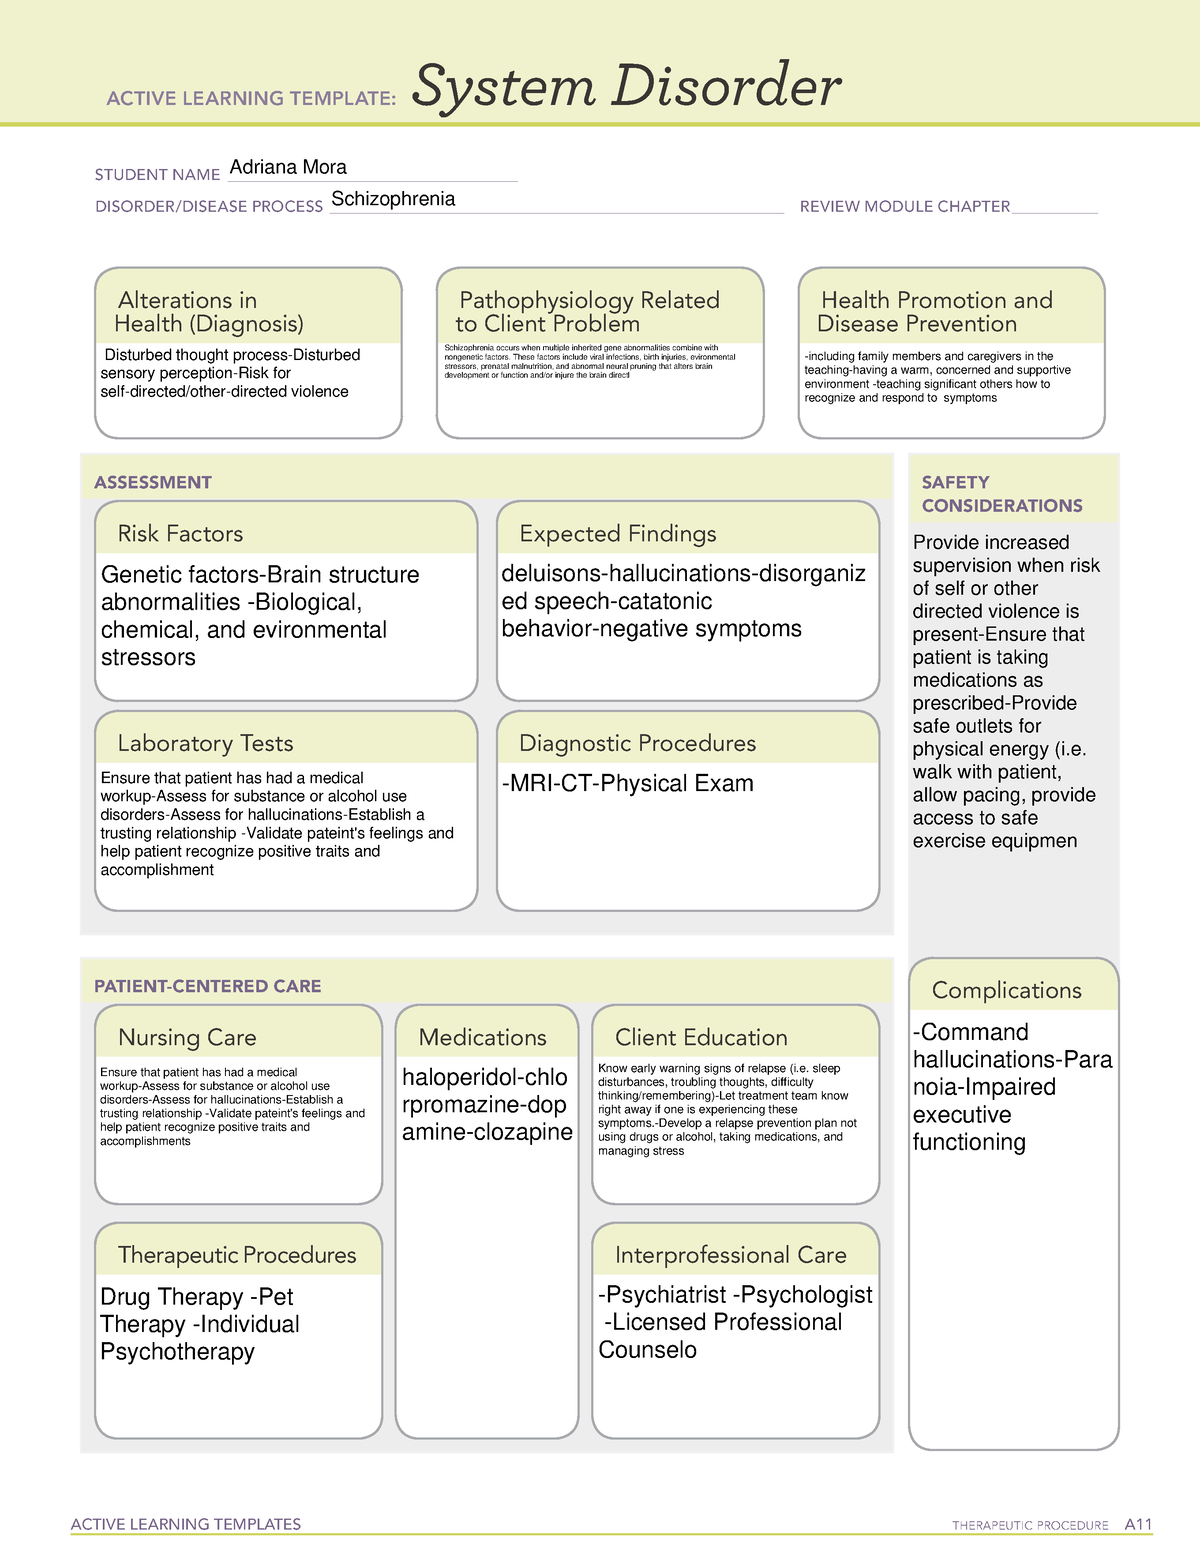 Schizophrenia SD - system disorder template - ACTIVE LEARNING TEMPLATES ...